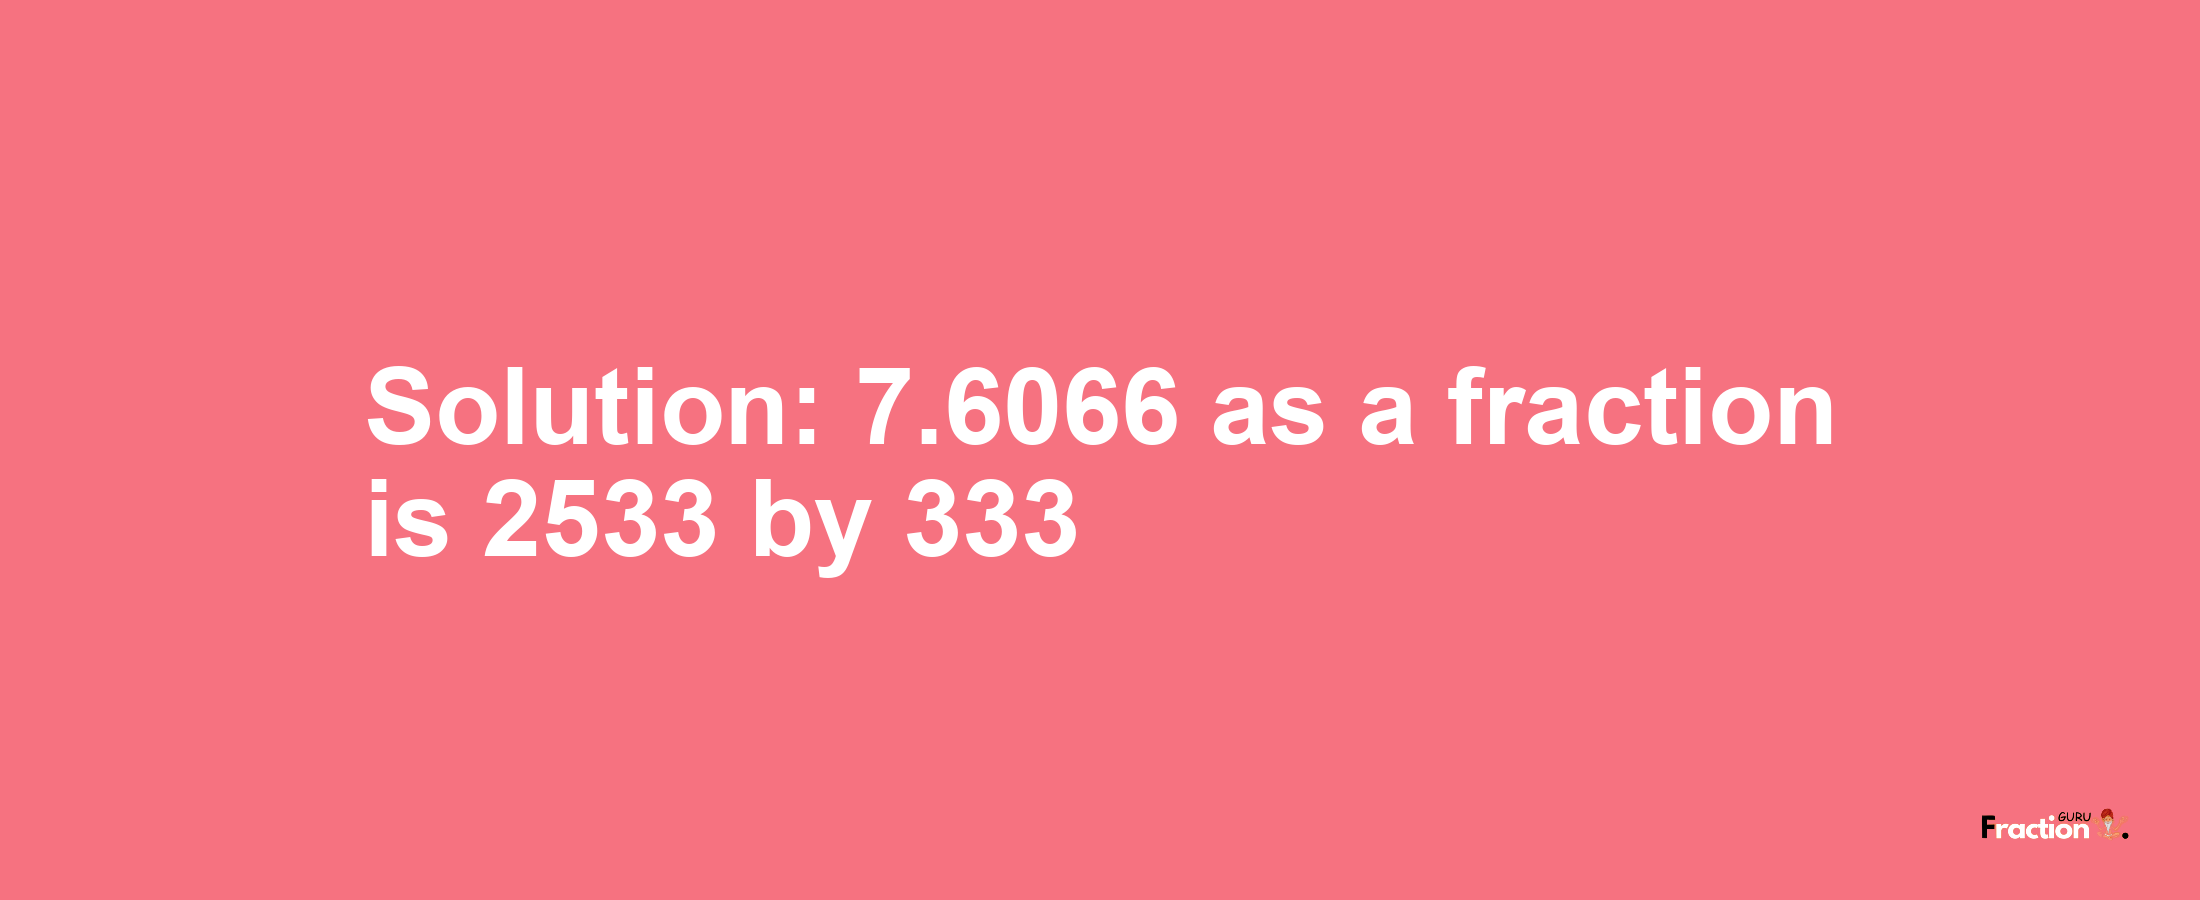 Solution:7.6066 as a fraction is 2533/333